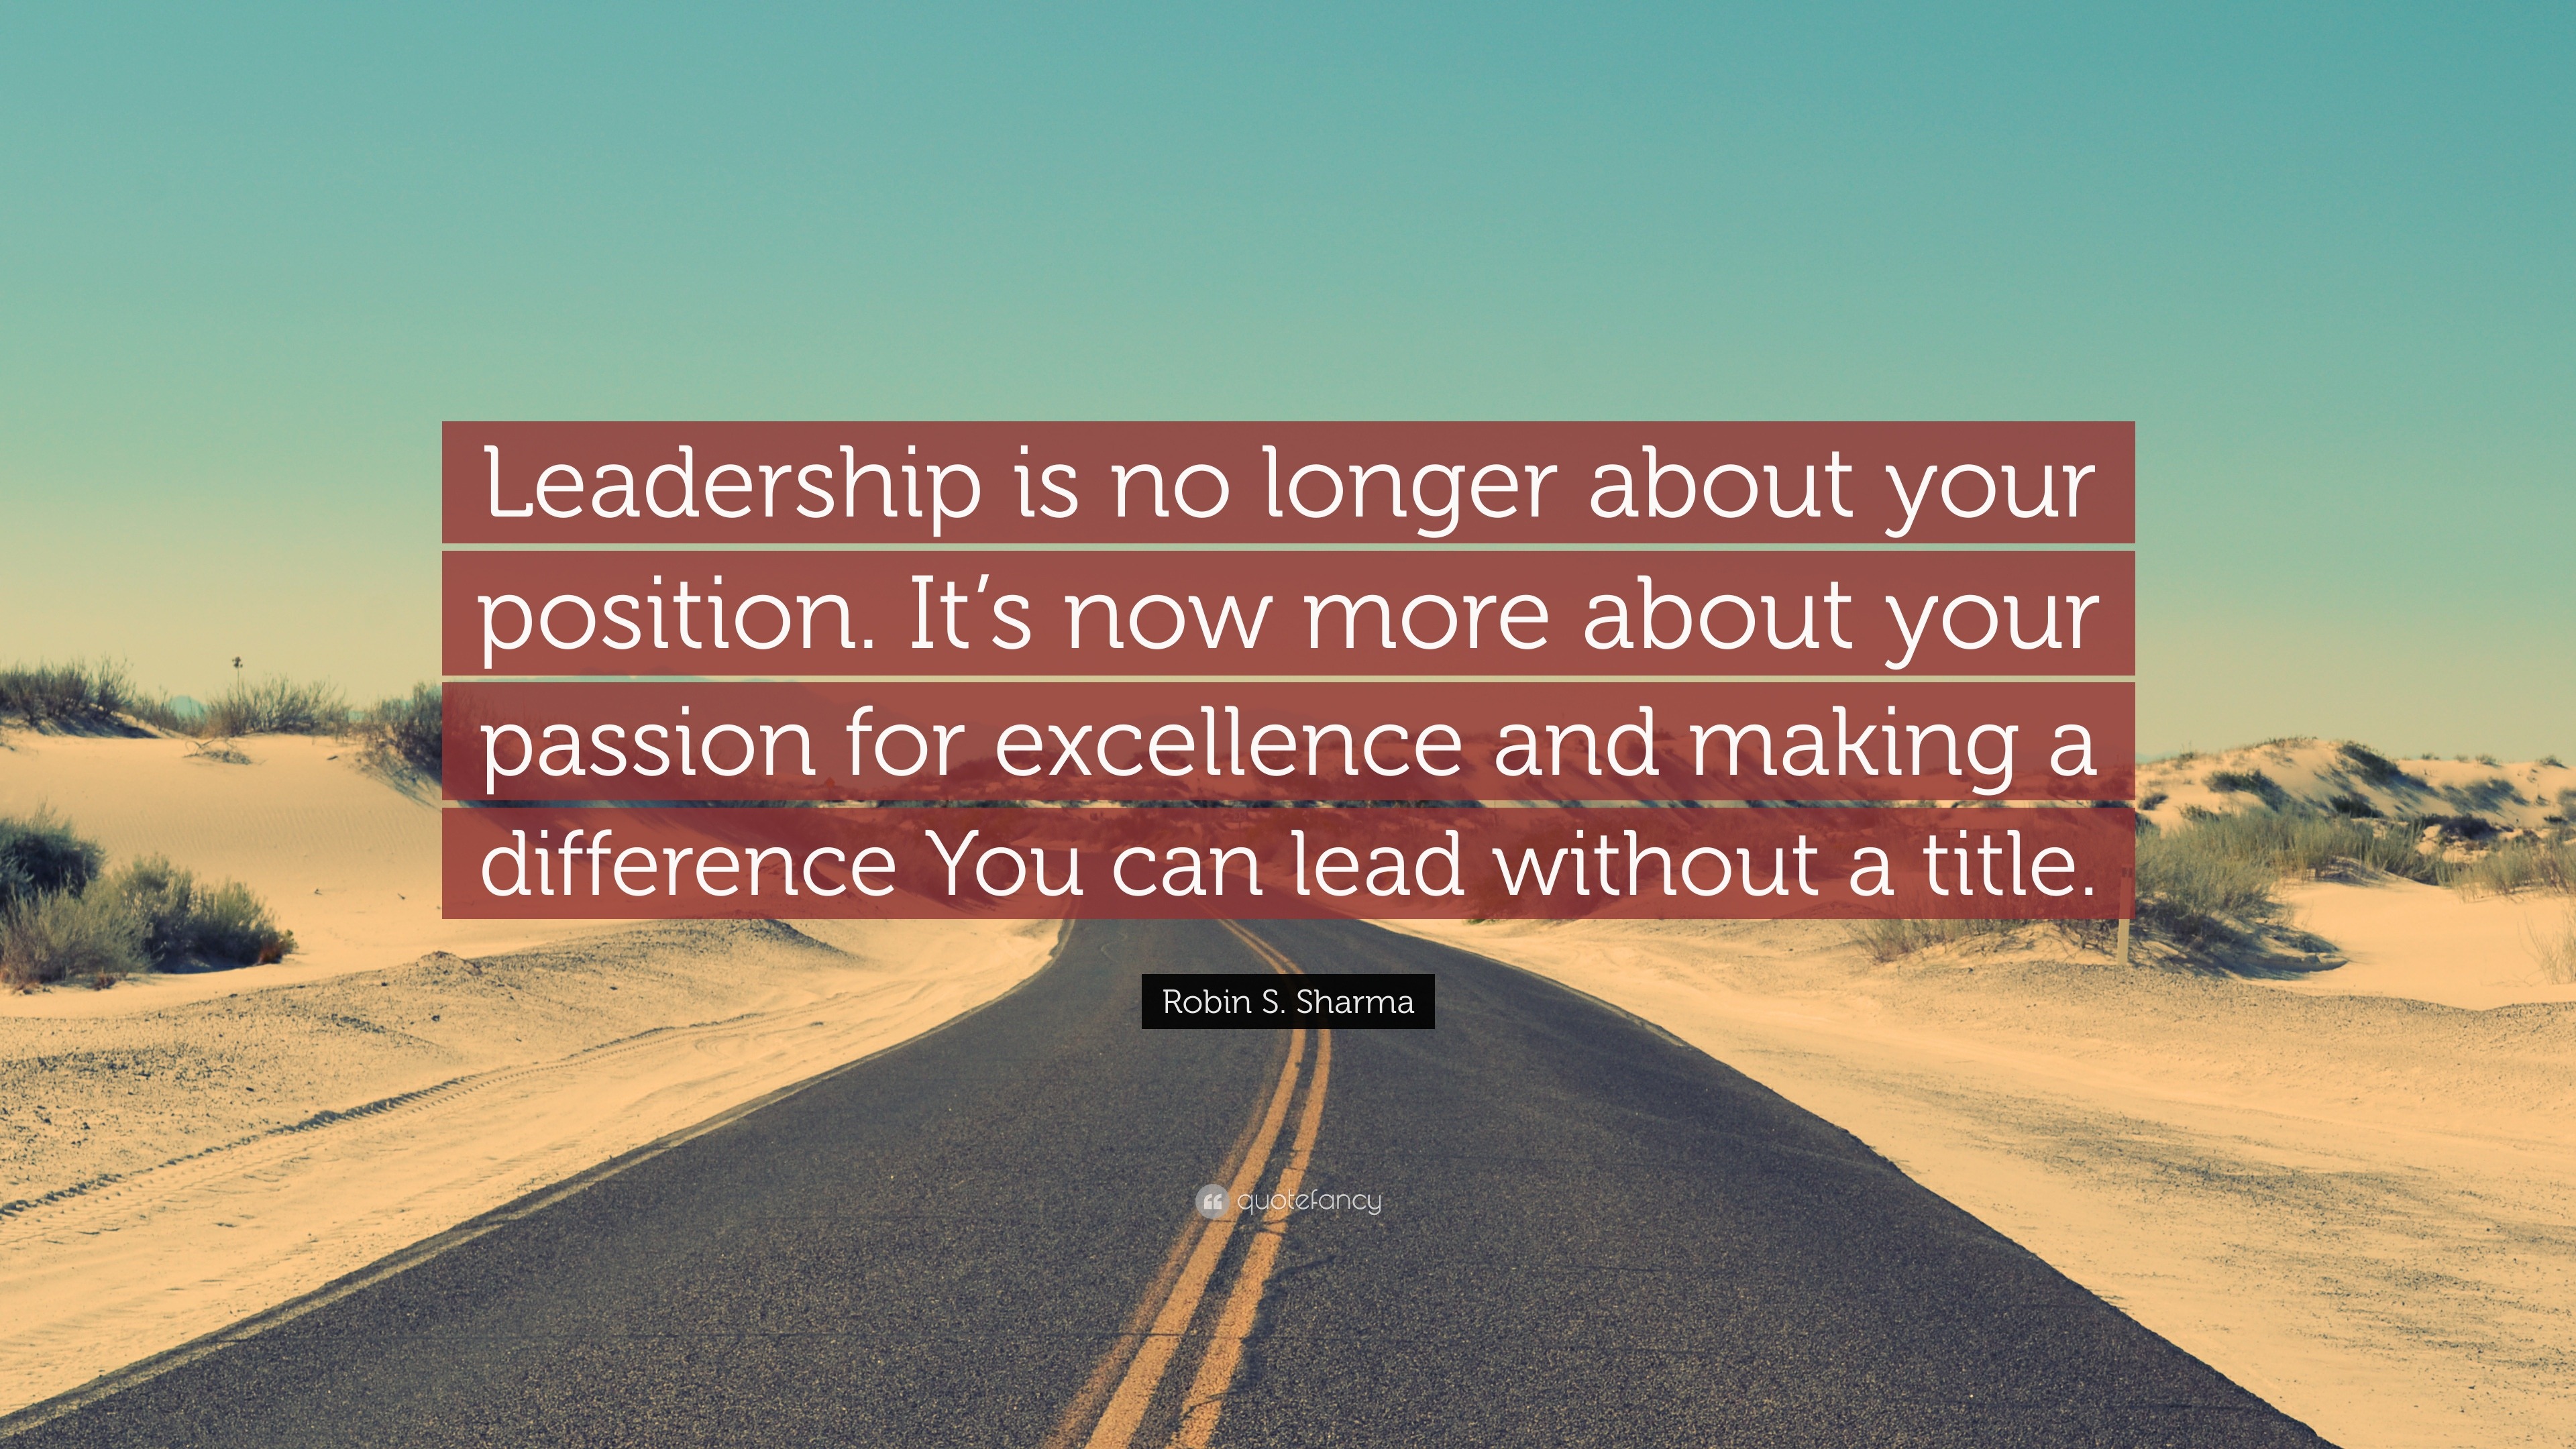 Robin S. Sharma Quote: “Leadership is no longer about your position. It ...